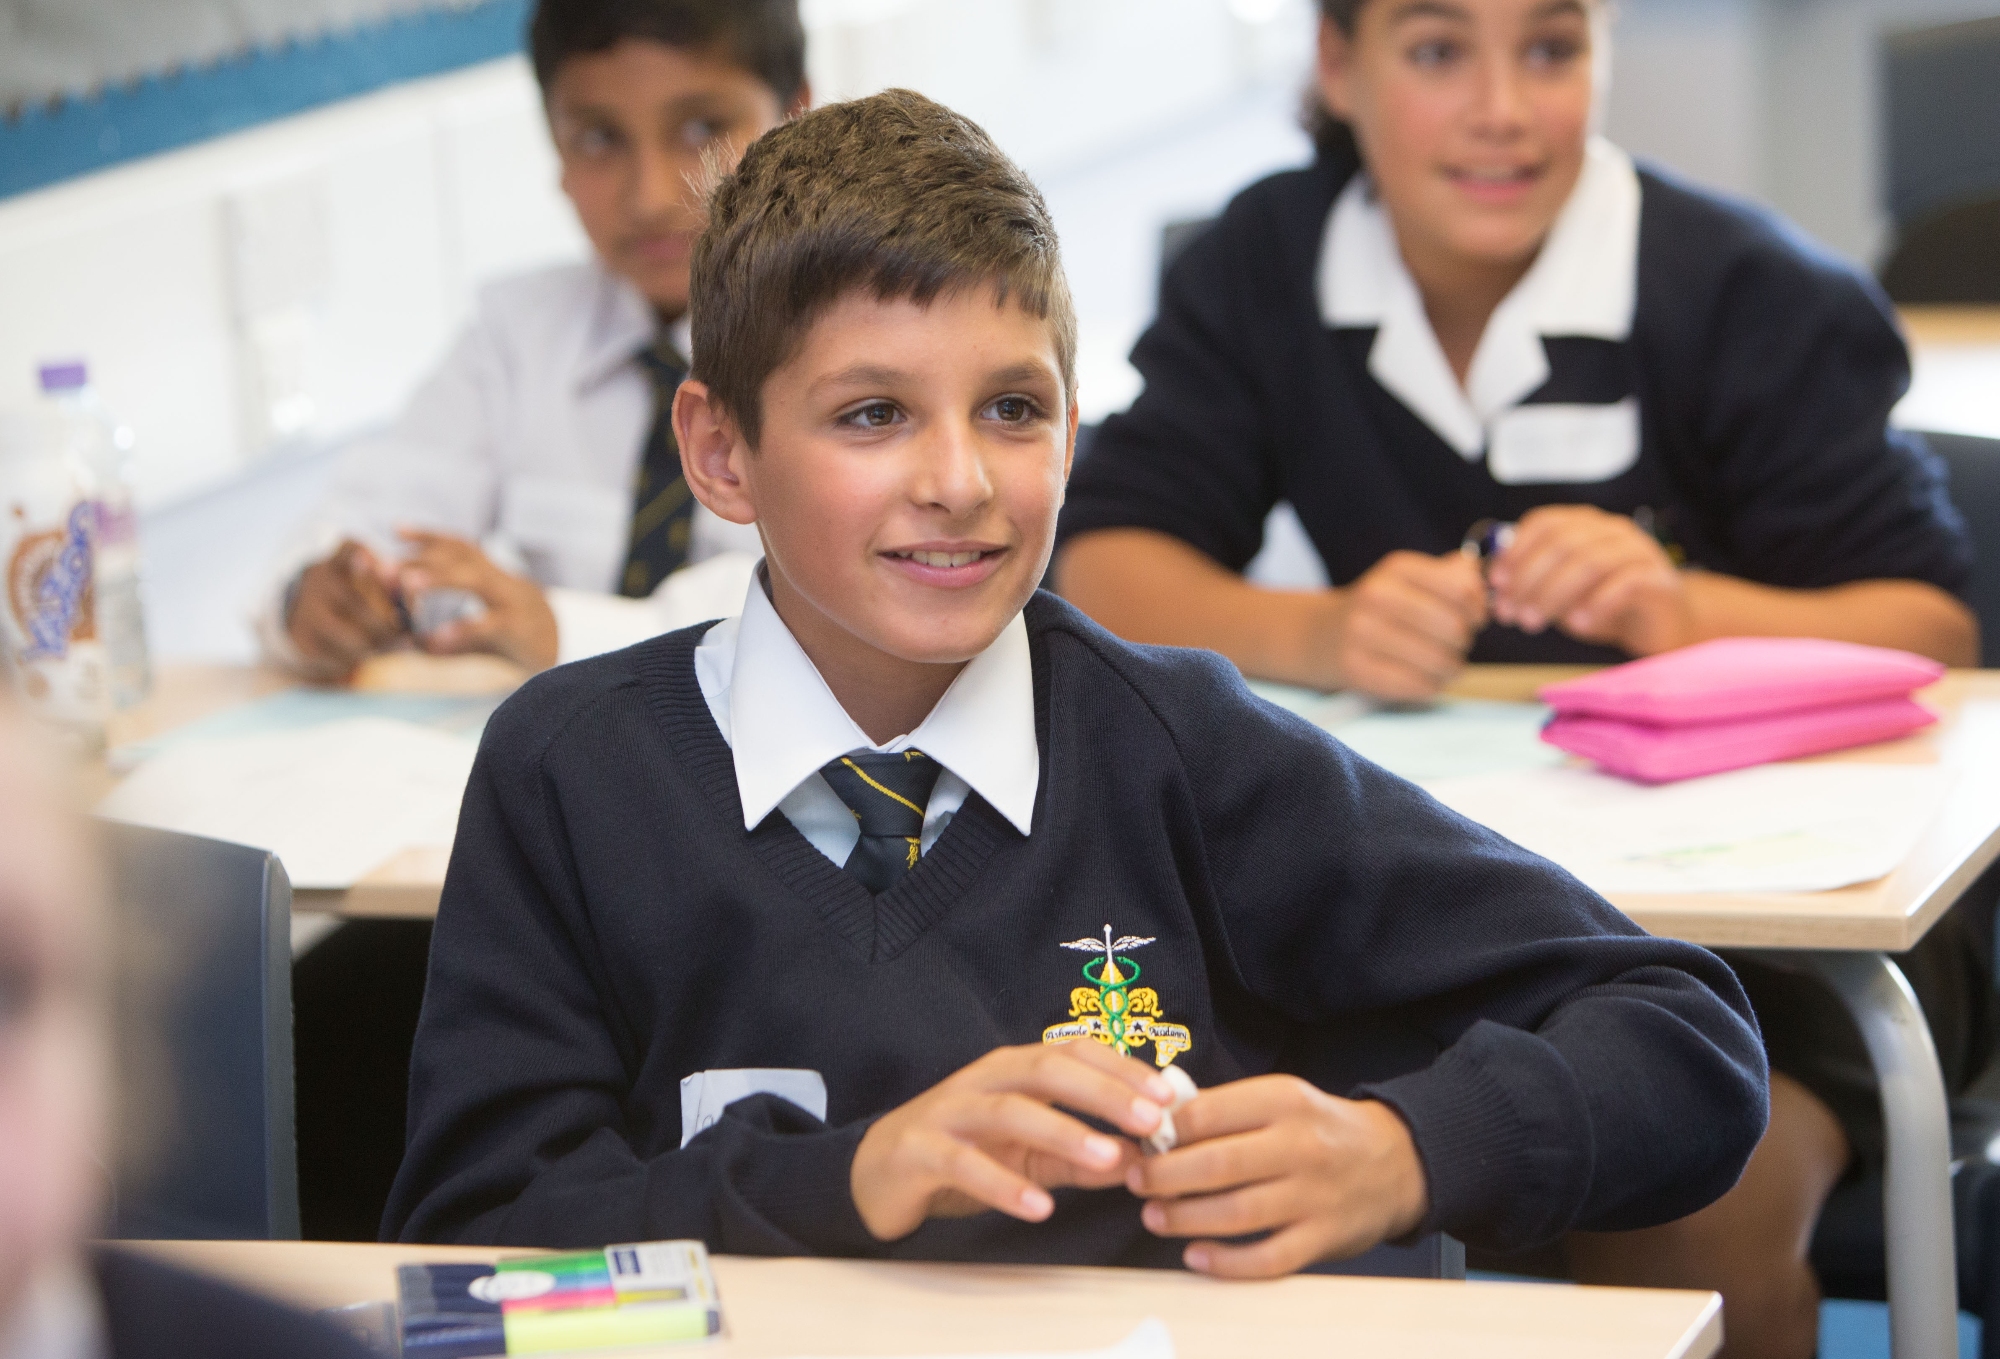 At Ashmole We Intend To Provide An Education Suitable For All Students And Where Every Child Can Make Very Good Progress That Action Includes Provision